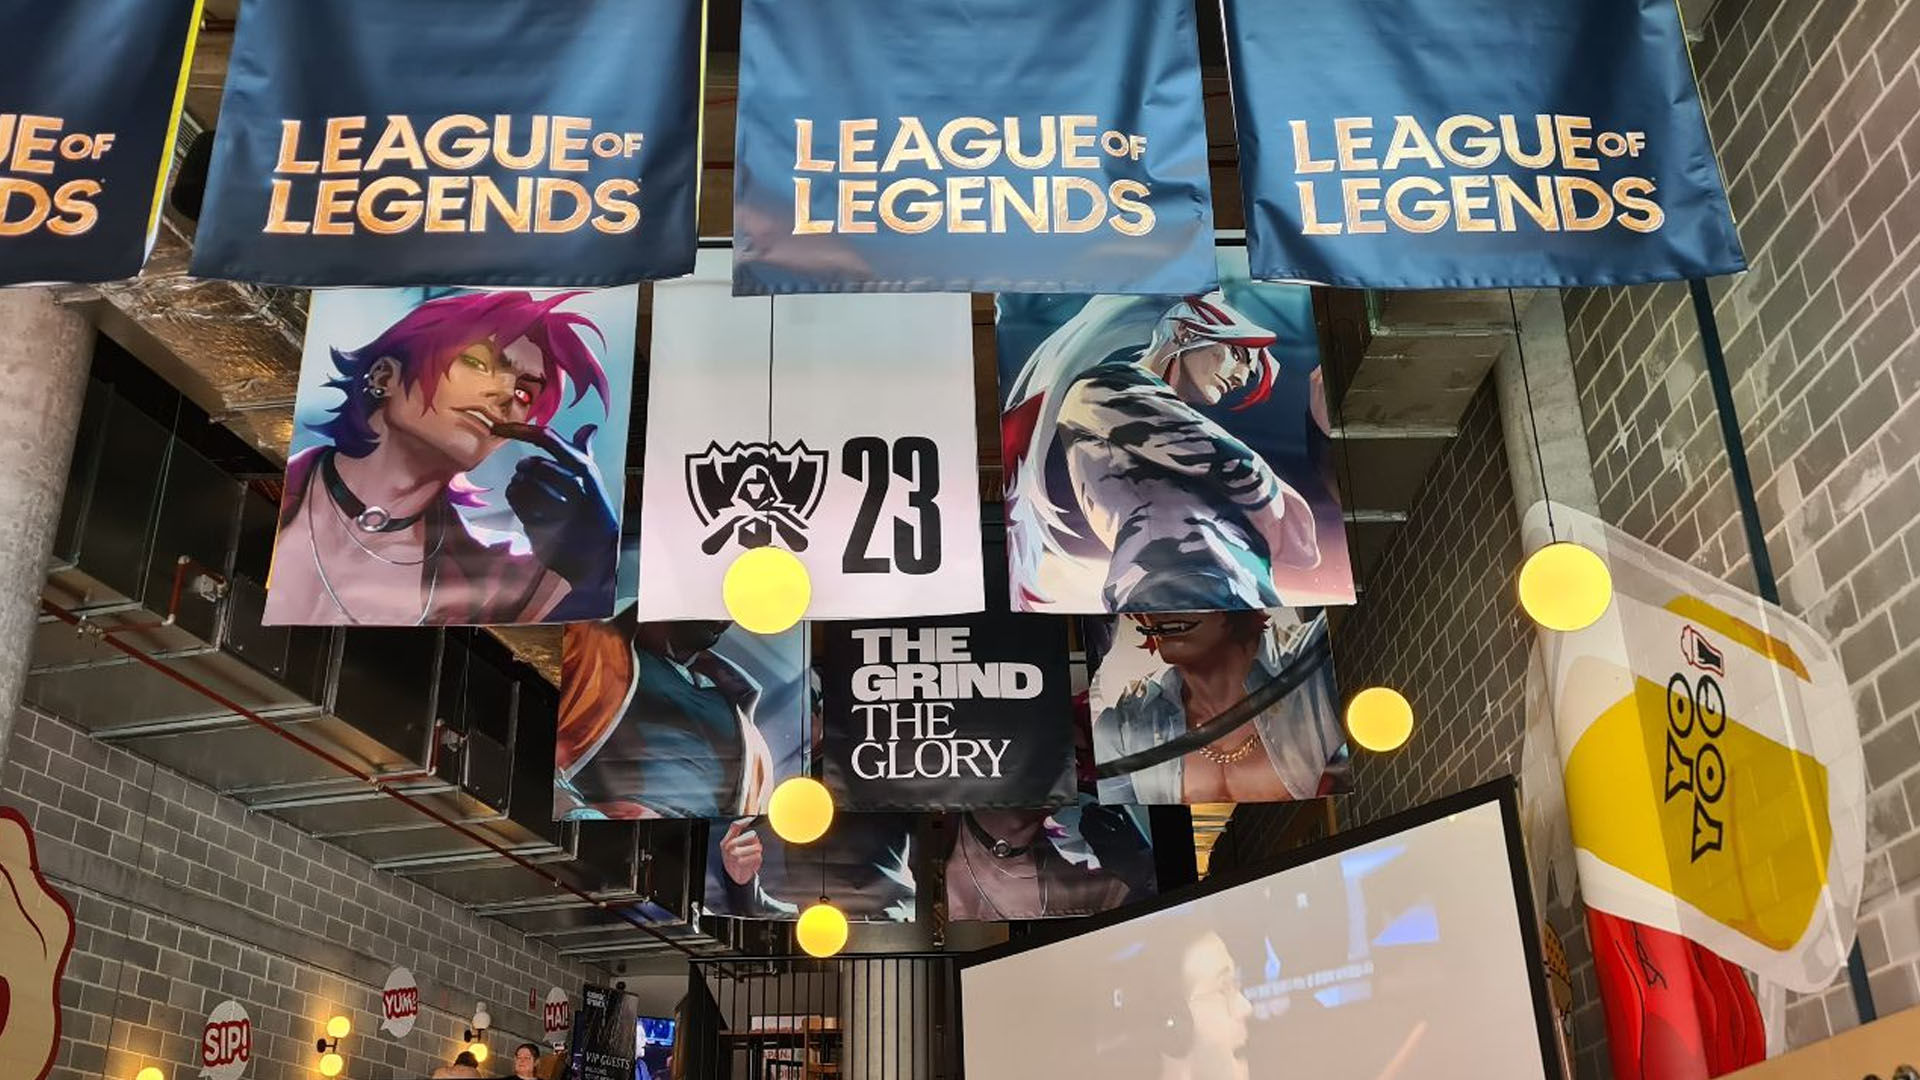 League of Legends - Worlds 2023 Schedule, How to Watch